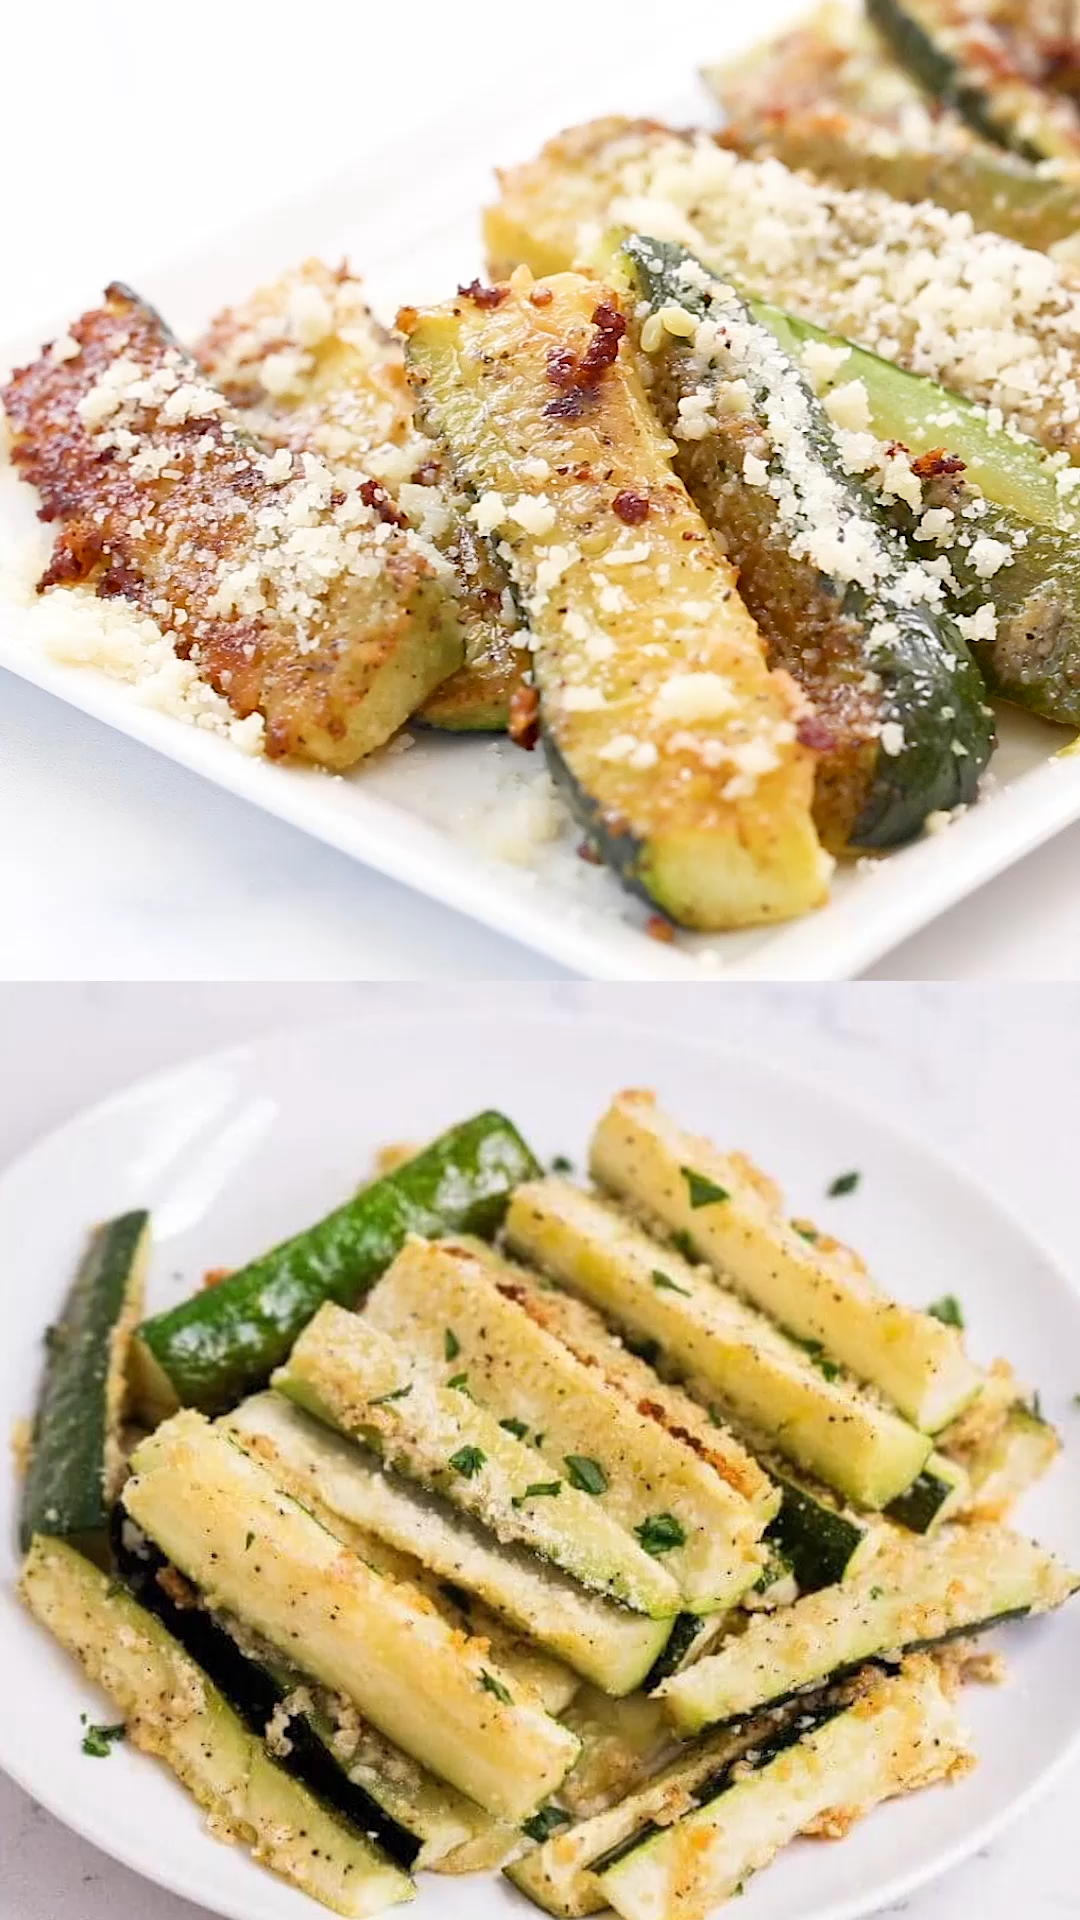 Baked Zucchini Fries -   19 healthy recipes Sides veggies ideas